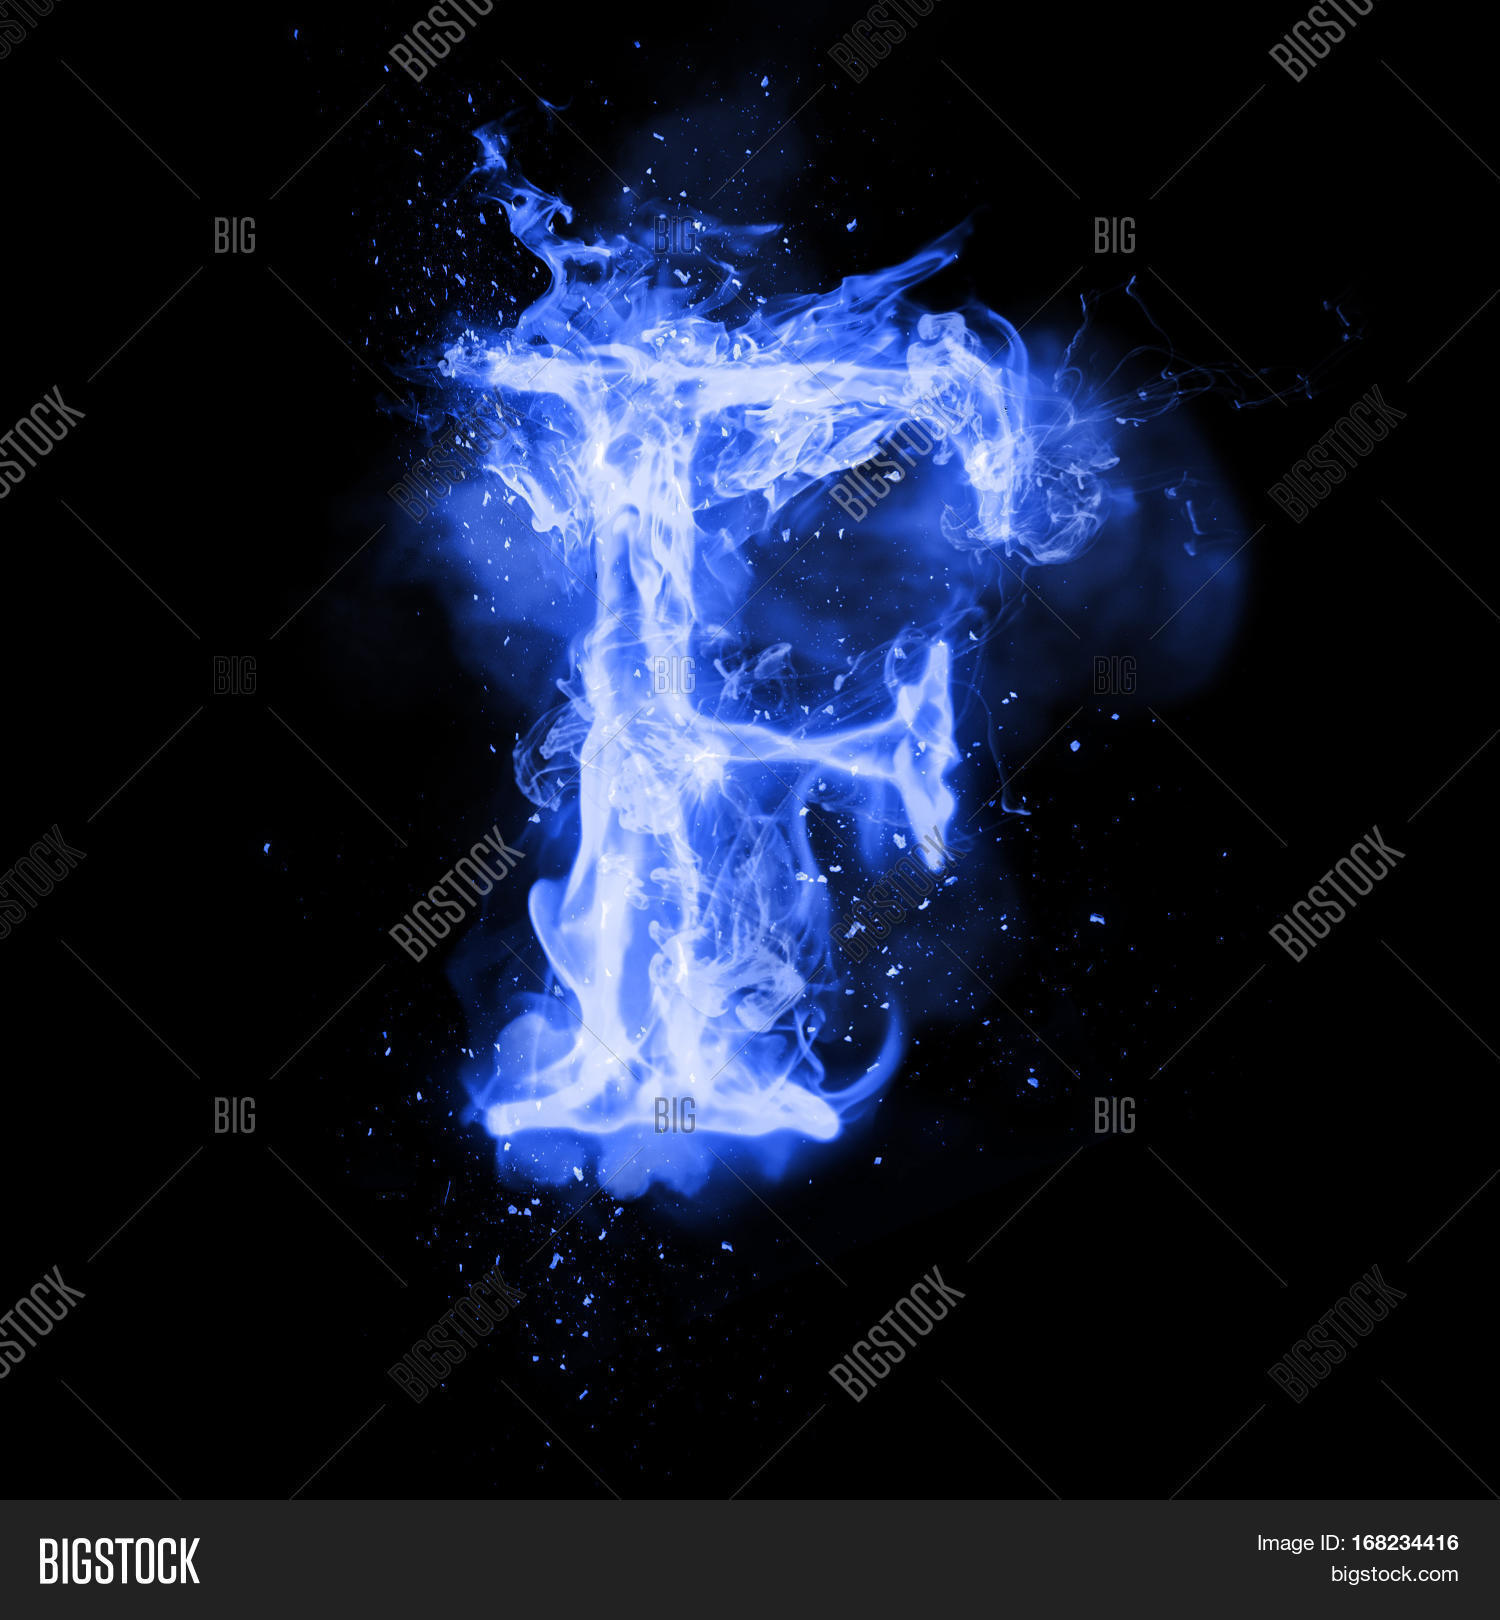 Fire Letter F Burning Blue Flame. Image & Photo | Bigstock